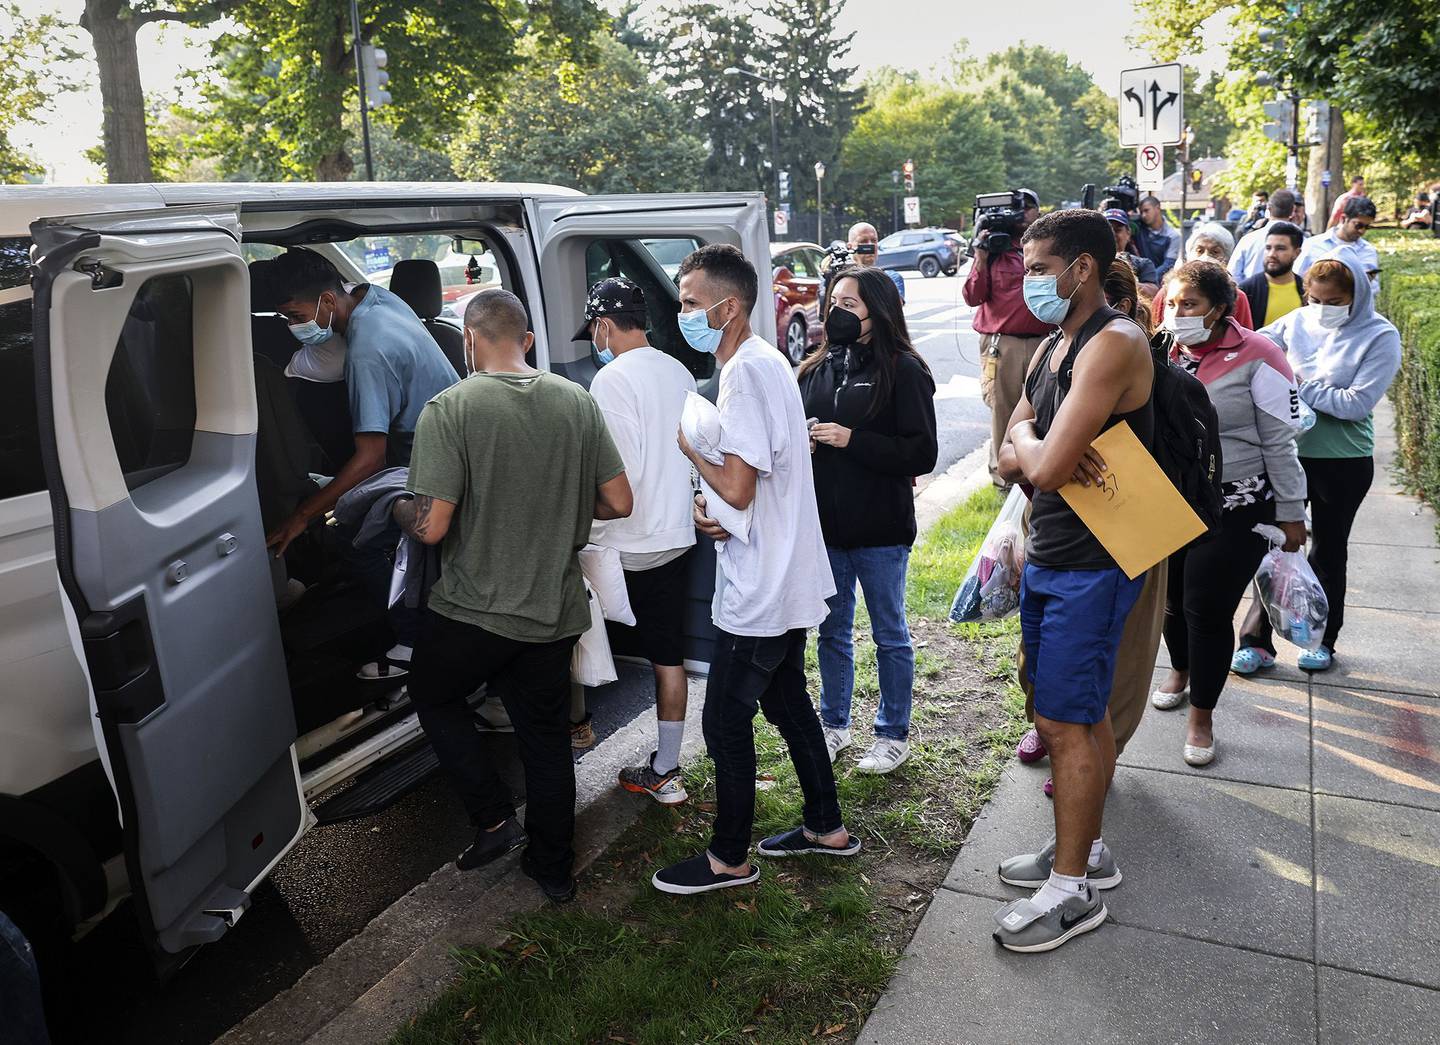 Migrants after being dropped off near the residence of Vice President Harris in Washington, D.C. on Sept. 15.